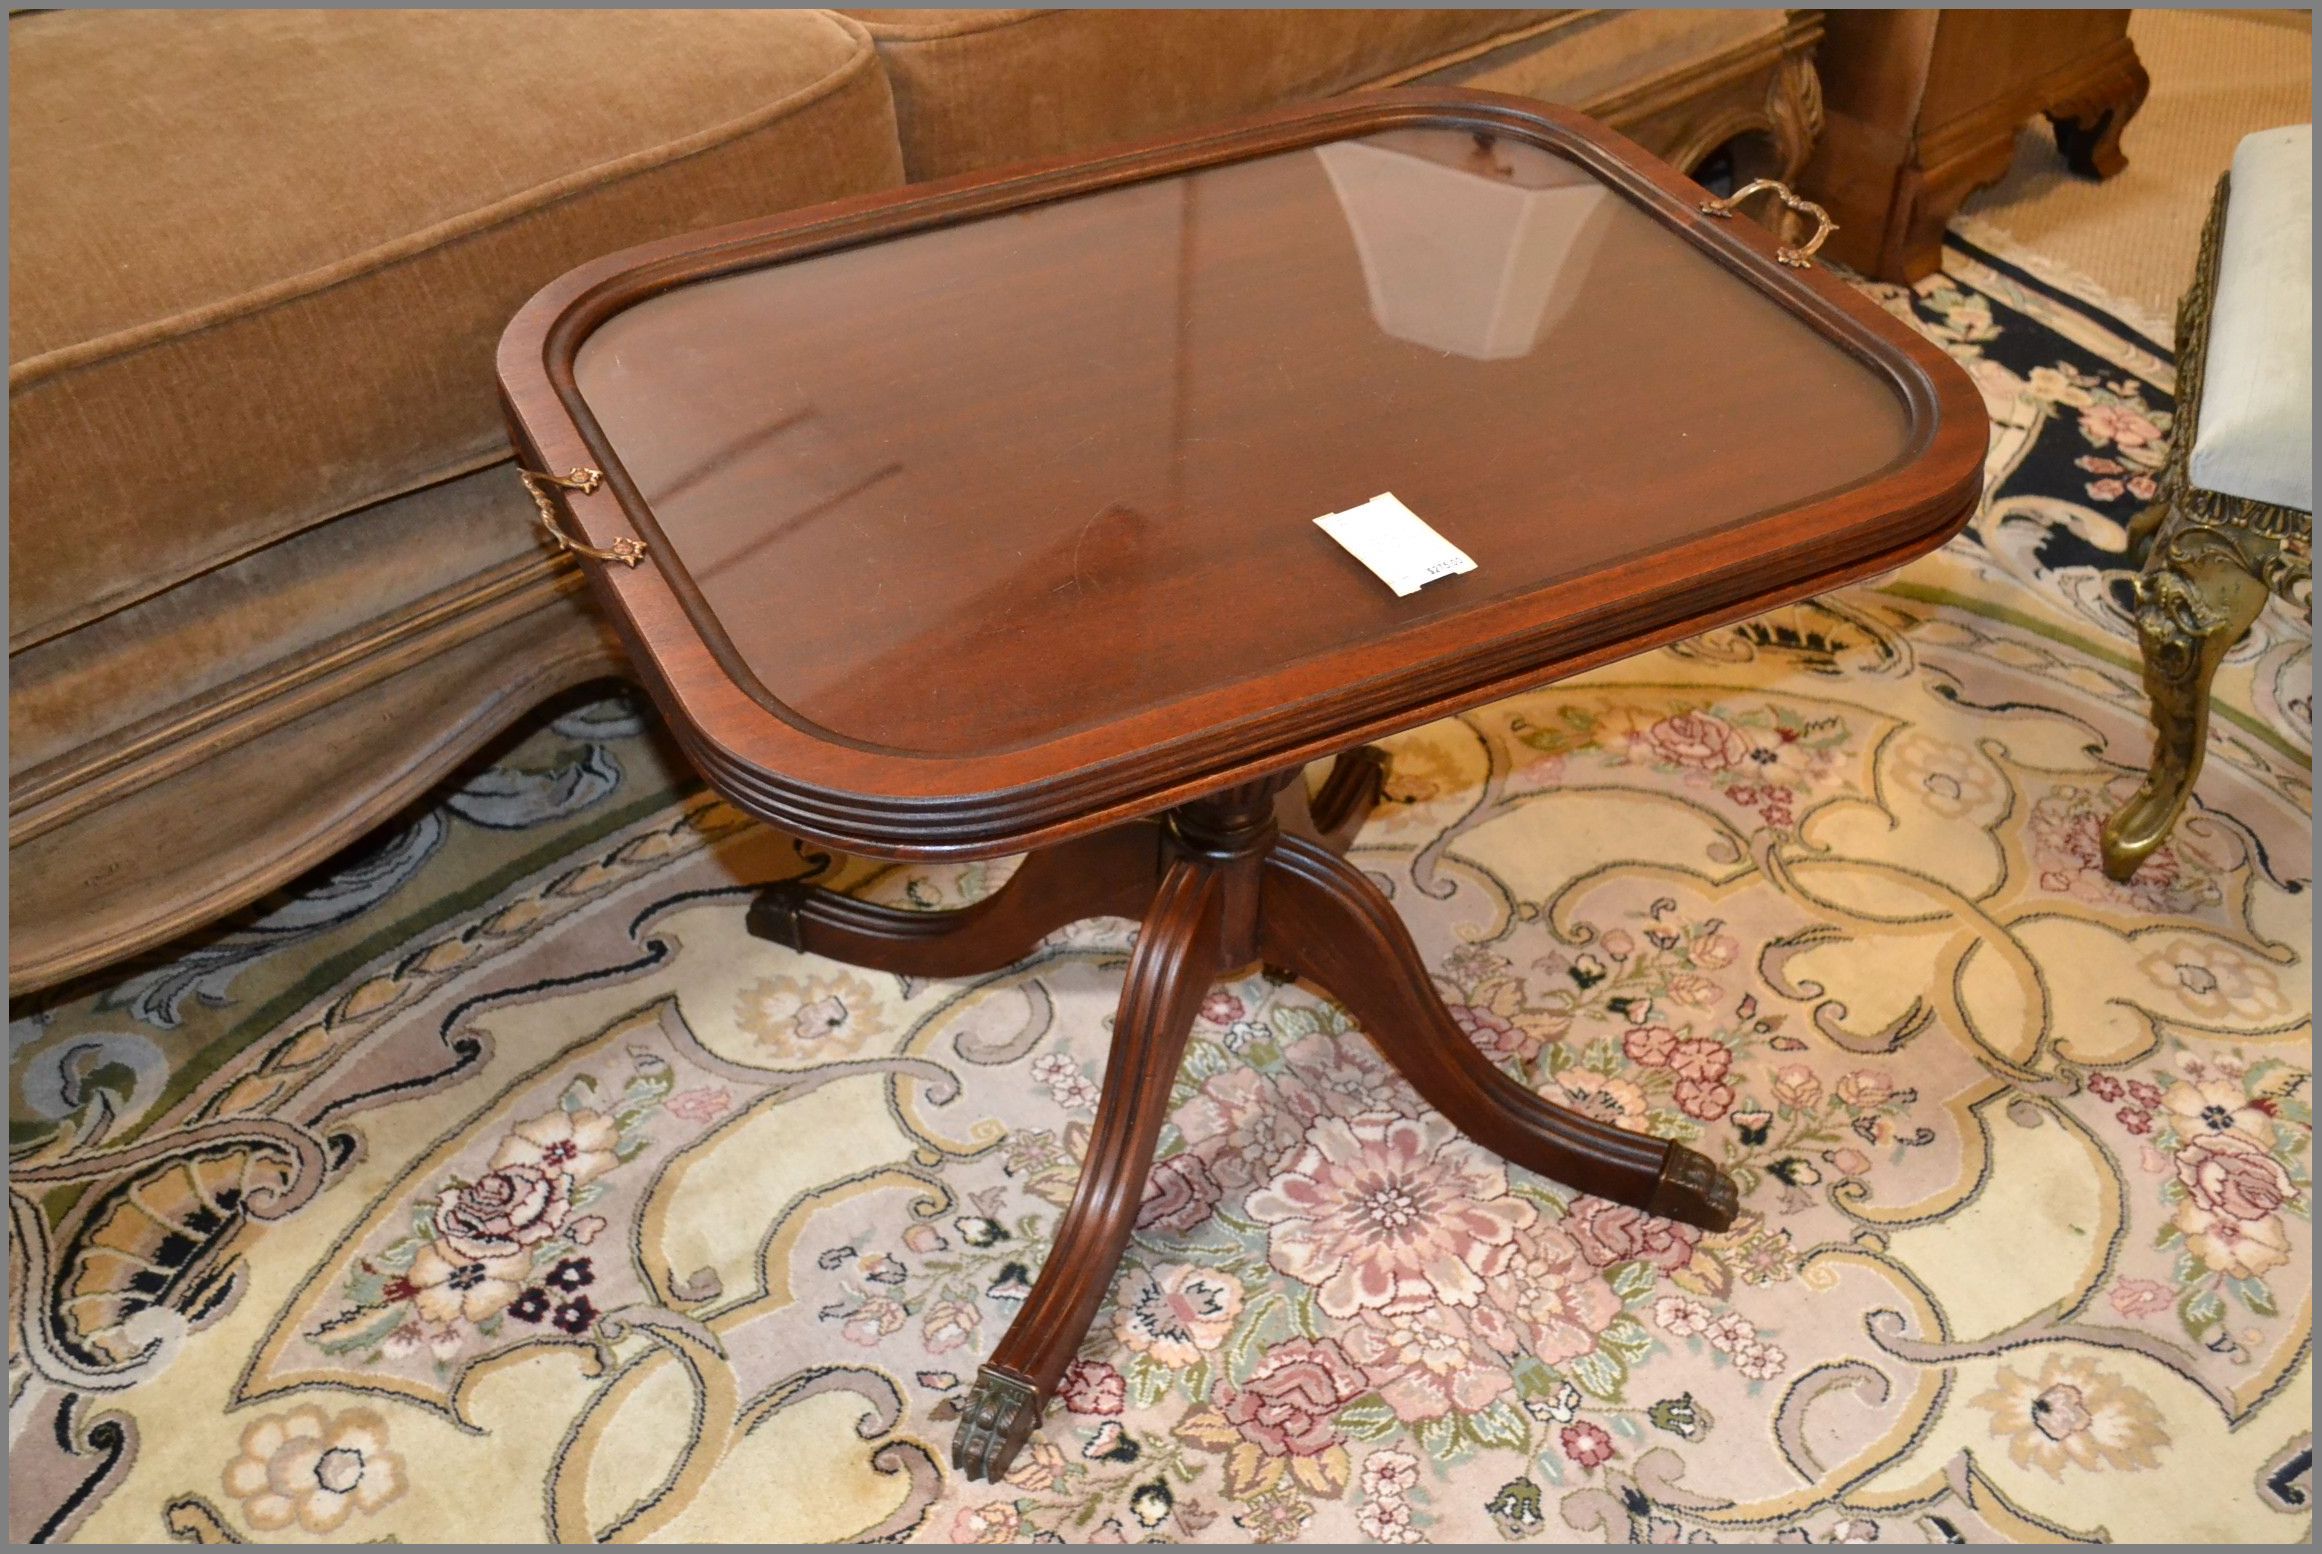 wonderfull antique mahogany tea table with glass tray french accent tables coffee small tall carpet termination strip area rugs black marble set lime green smoked side miniature